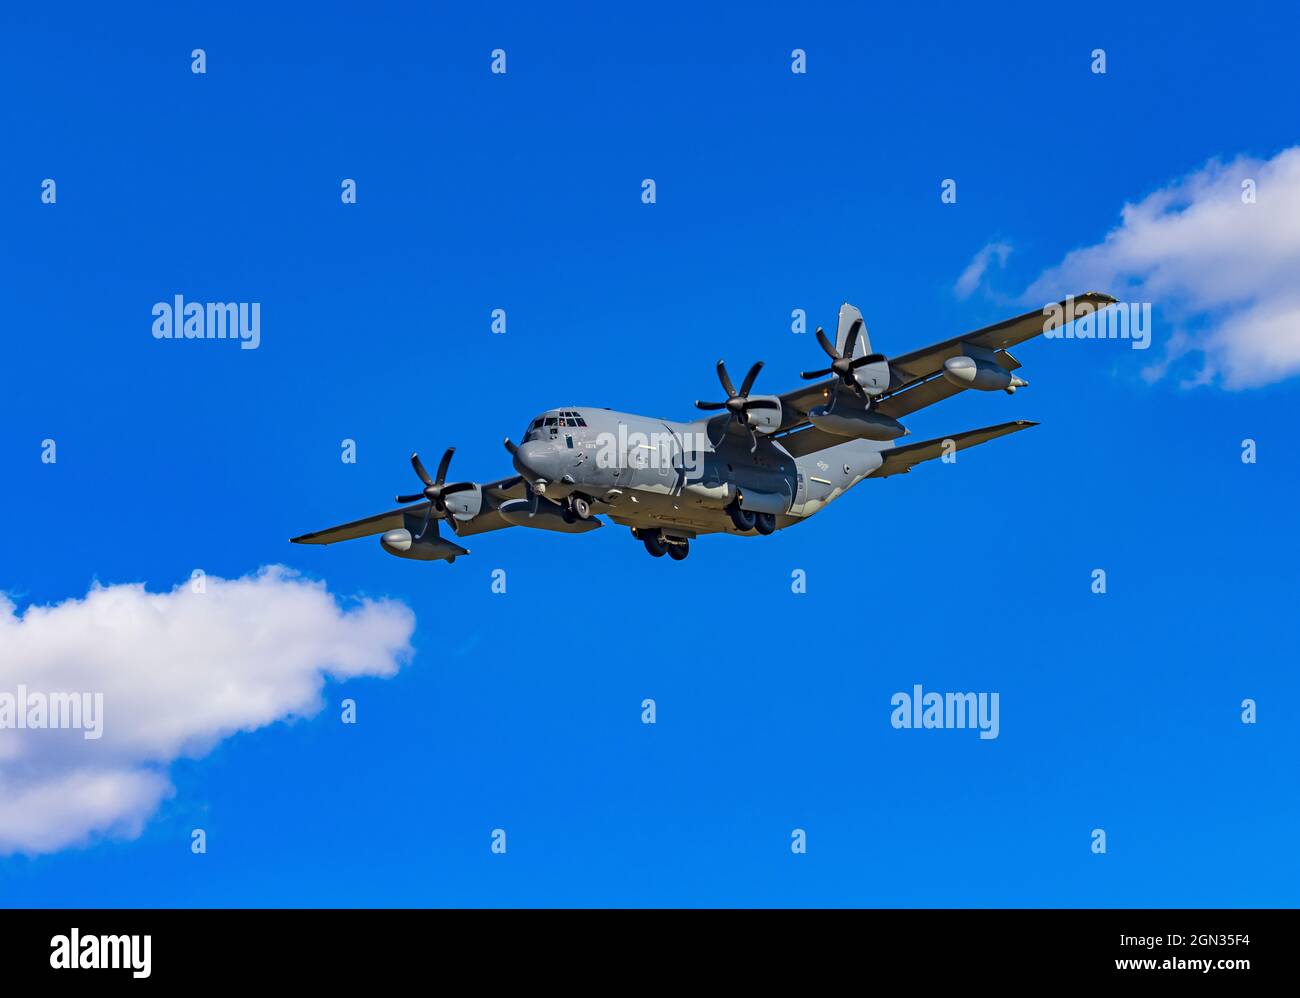 A Lockheed C-130 Hercules cargo plane approaches the runway to land at Hill Air Force Base, Layton, Utah, USA. Stock Photo